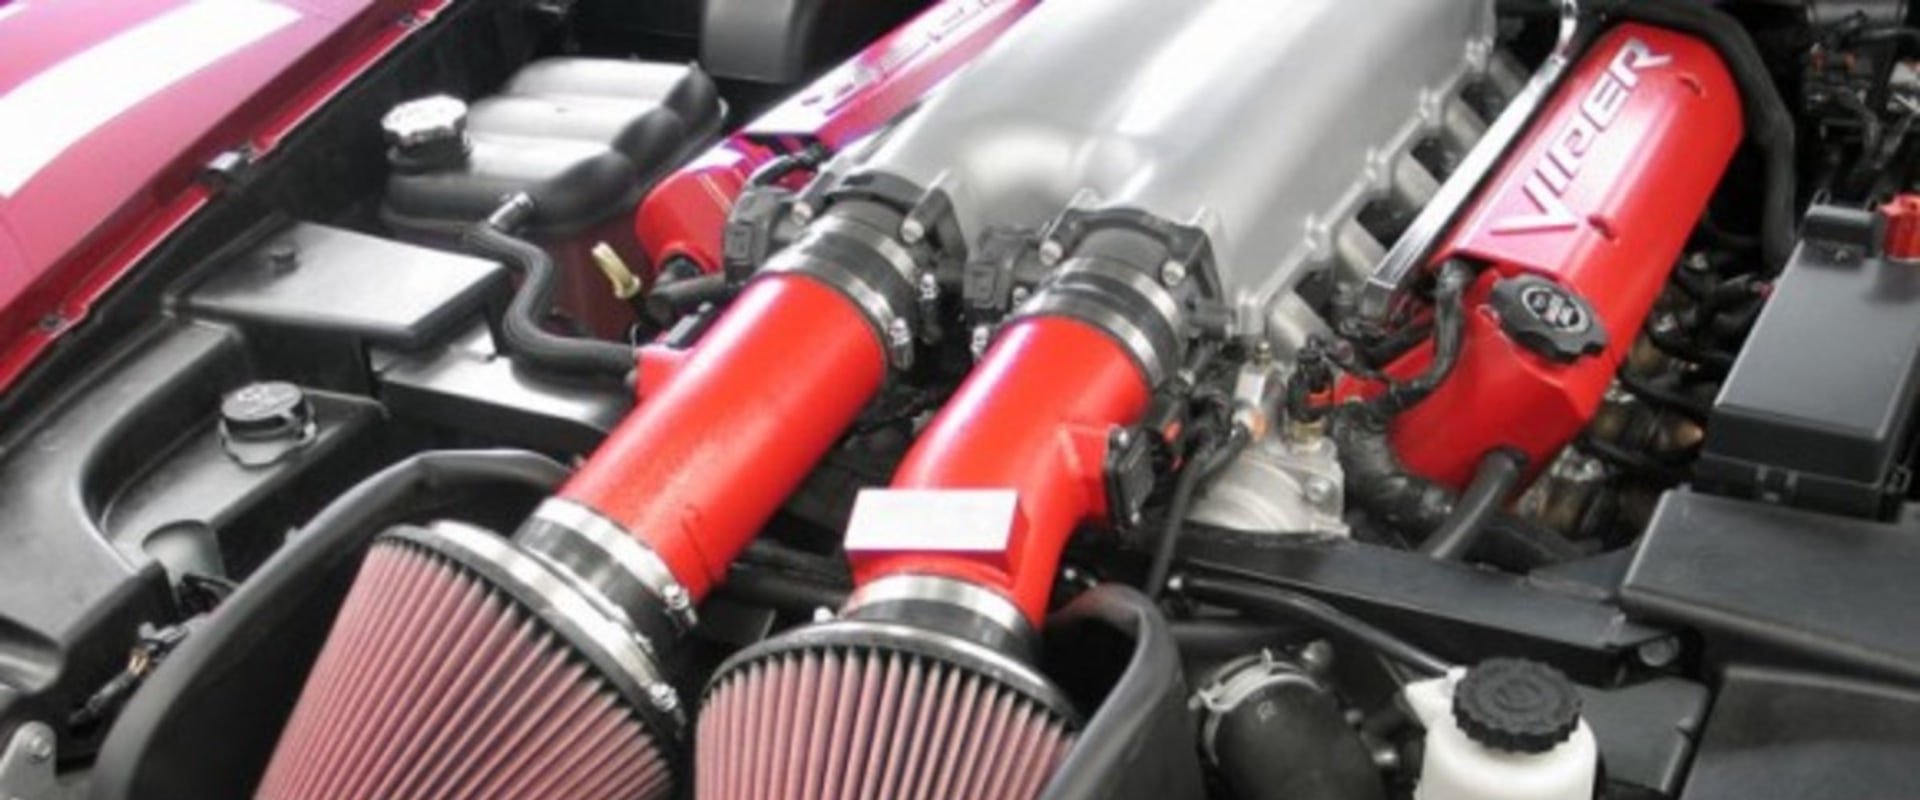 Does Changing the Air Filter Increase Horsepower?